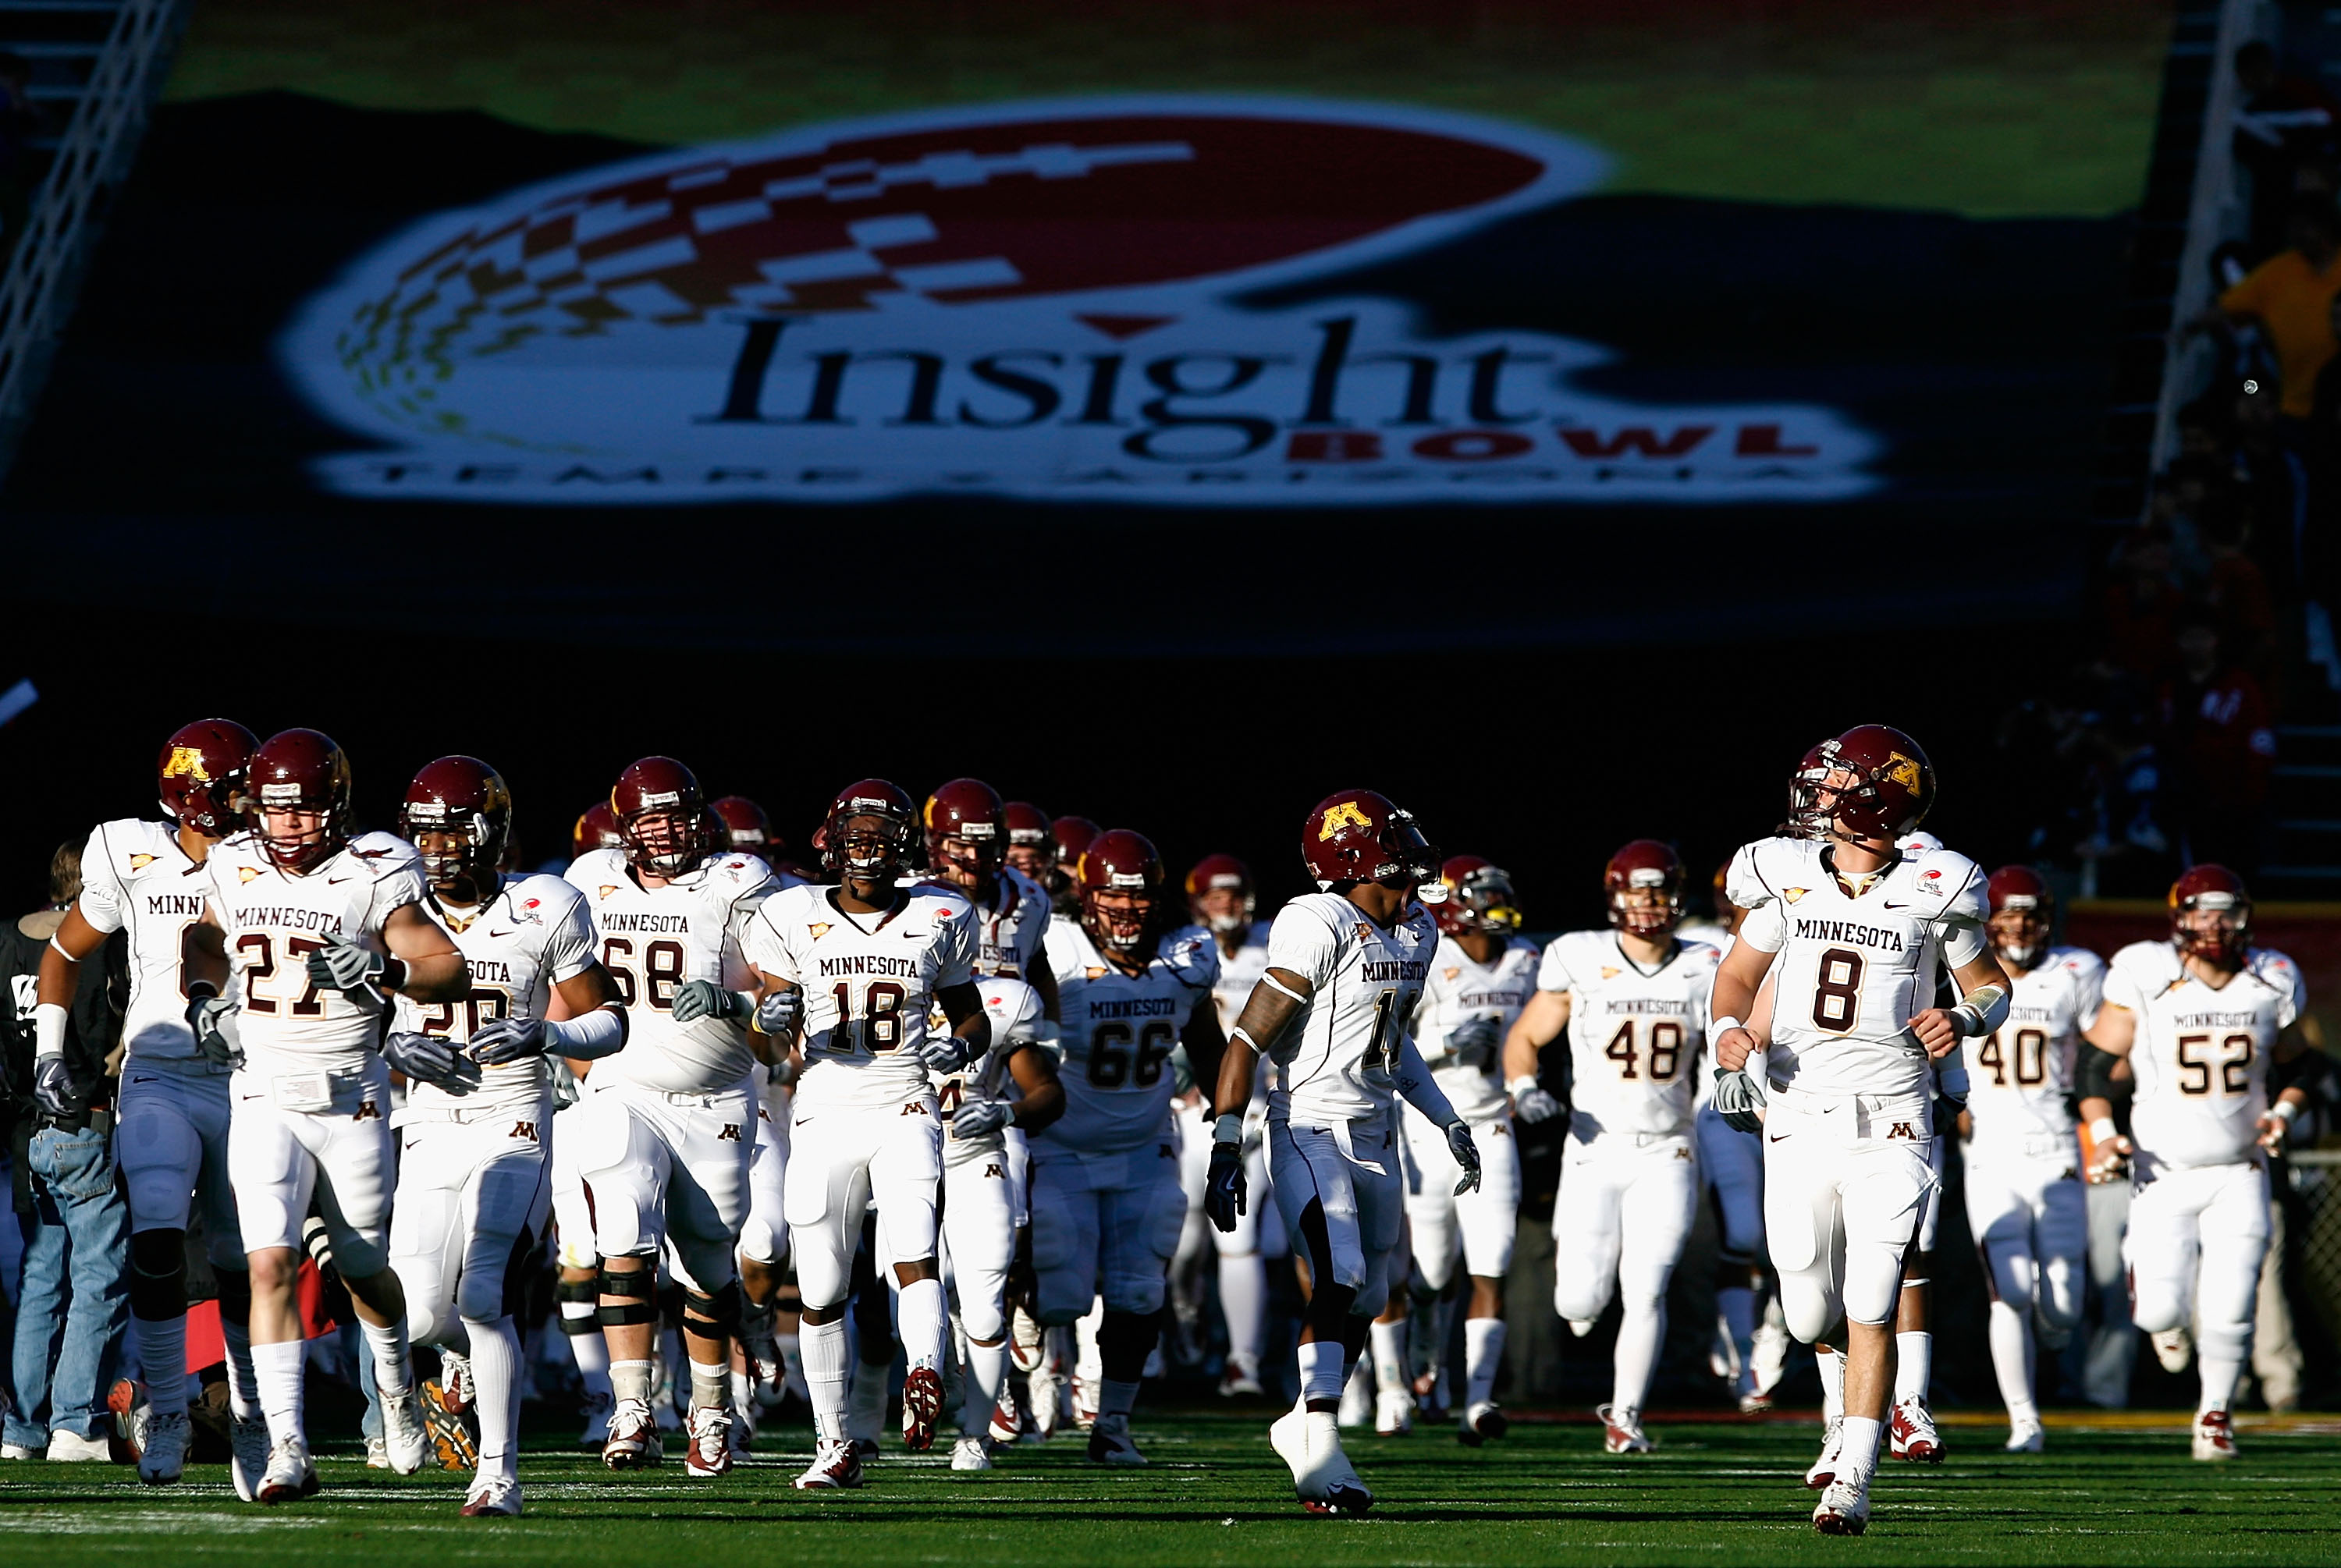 TEMPE, AZ - DECEMBER 31:  The Minnesota Golden Gophers run out onto the field before the Insight Bowl against the Iowa State Cyclones at Arizona Stadium on December 31, 2009 in Tempe, Arizona.  (Photo by Christian Petersen/Getty Images)